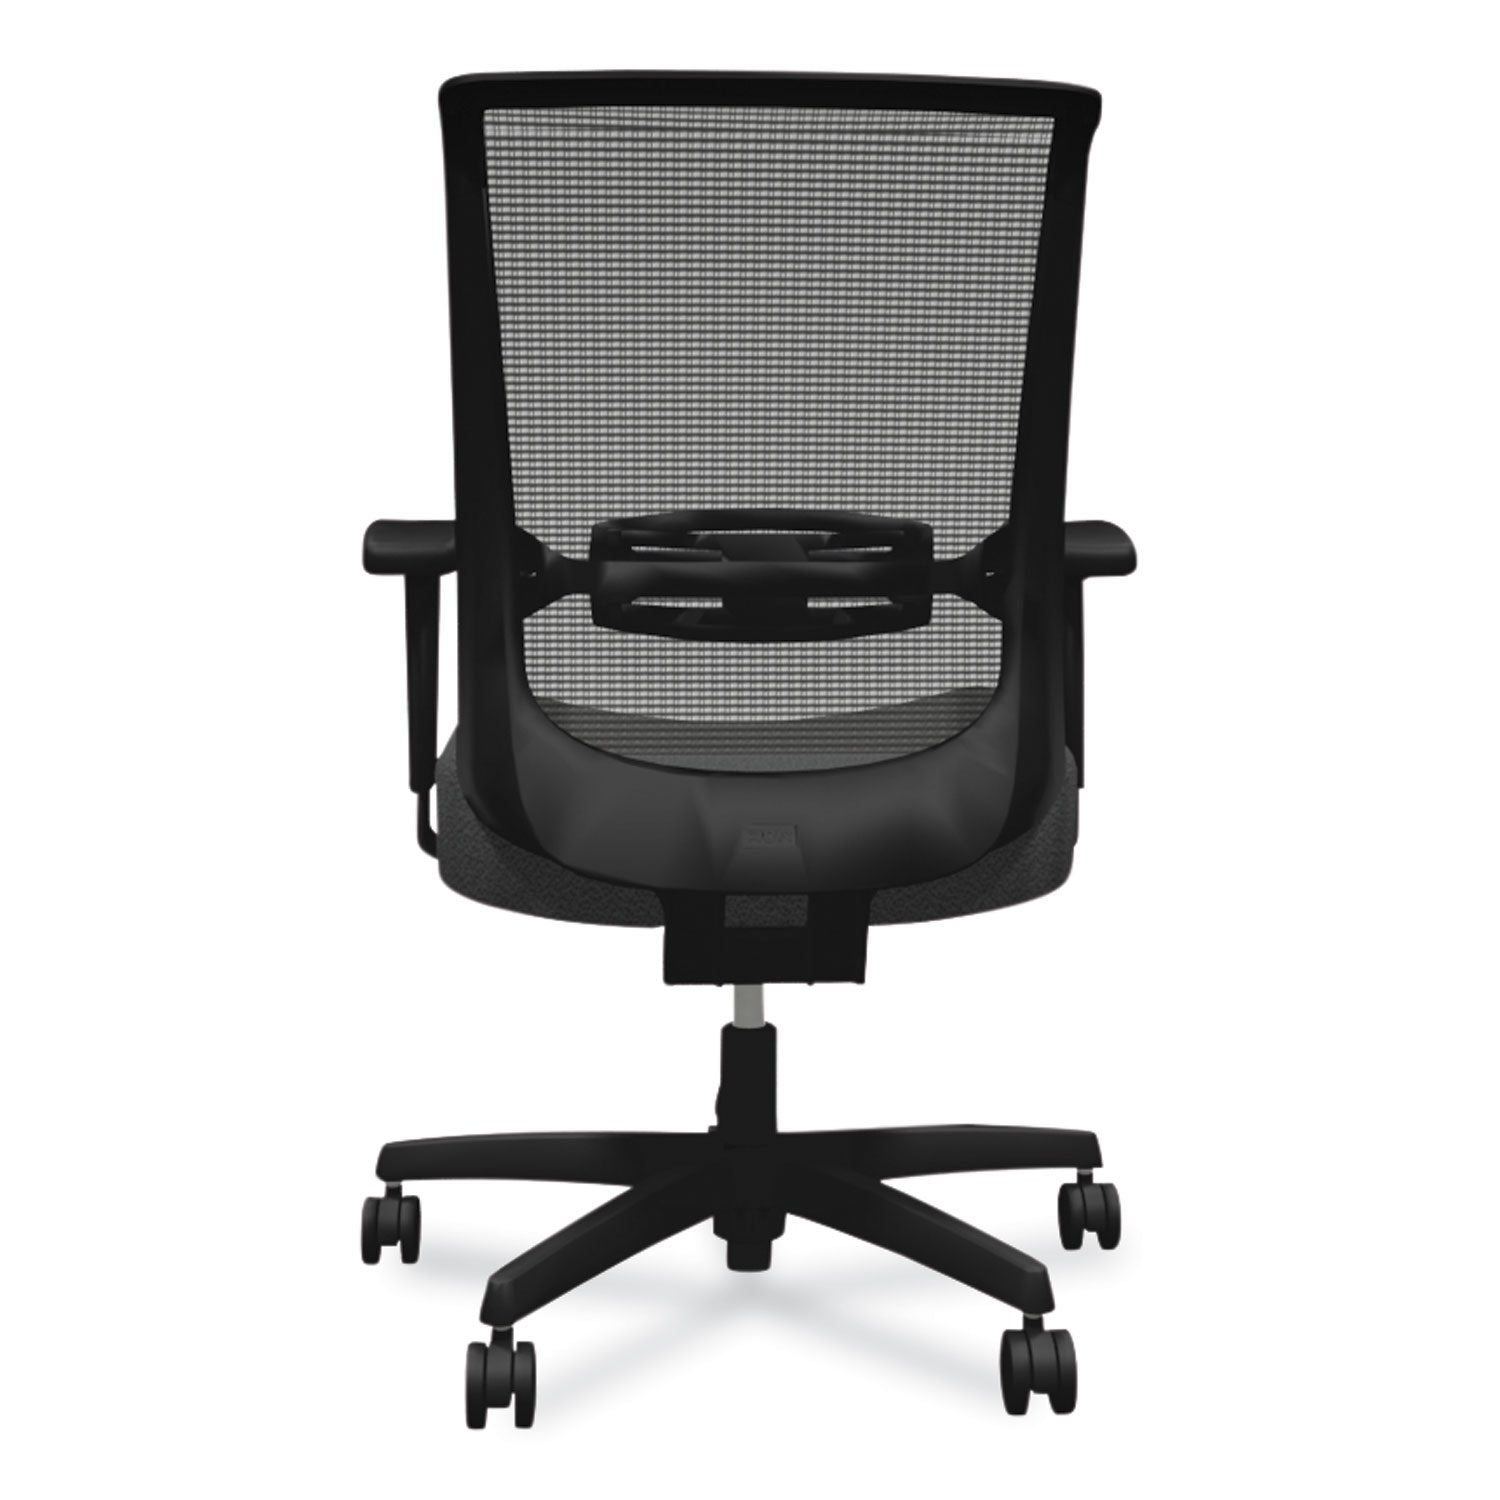 convergence-mid-back-task-chair-swivel-tilt-supports-up-to-275-lb-165-to-21-seat-height-iron-ore-seat-black-back-base_honcmz1acu19 - 4